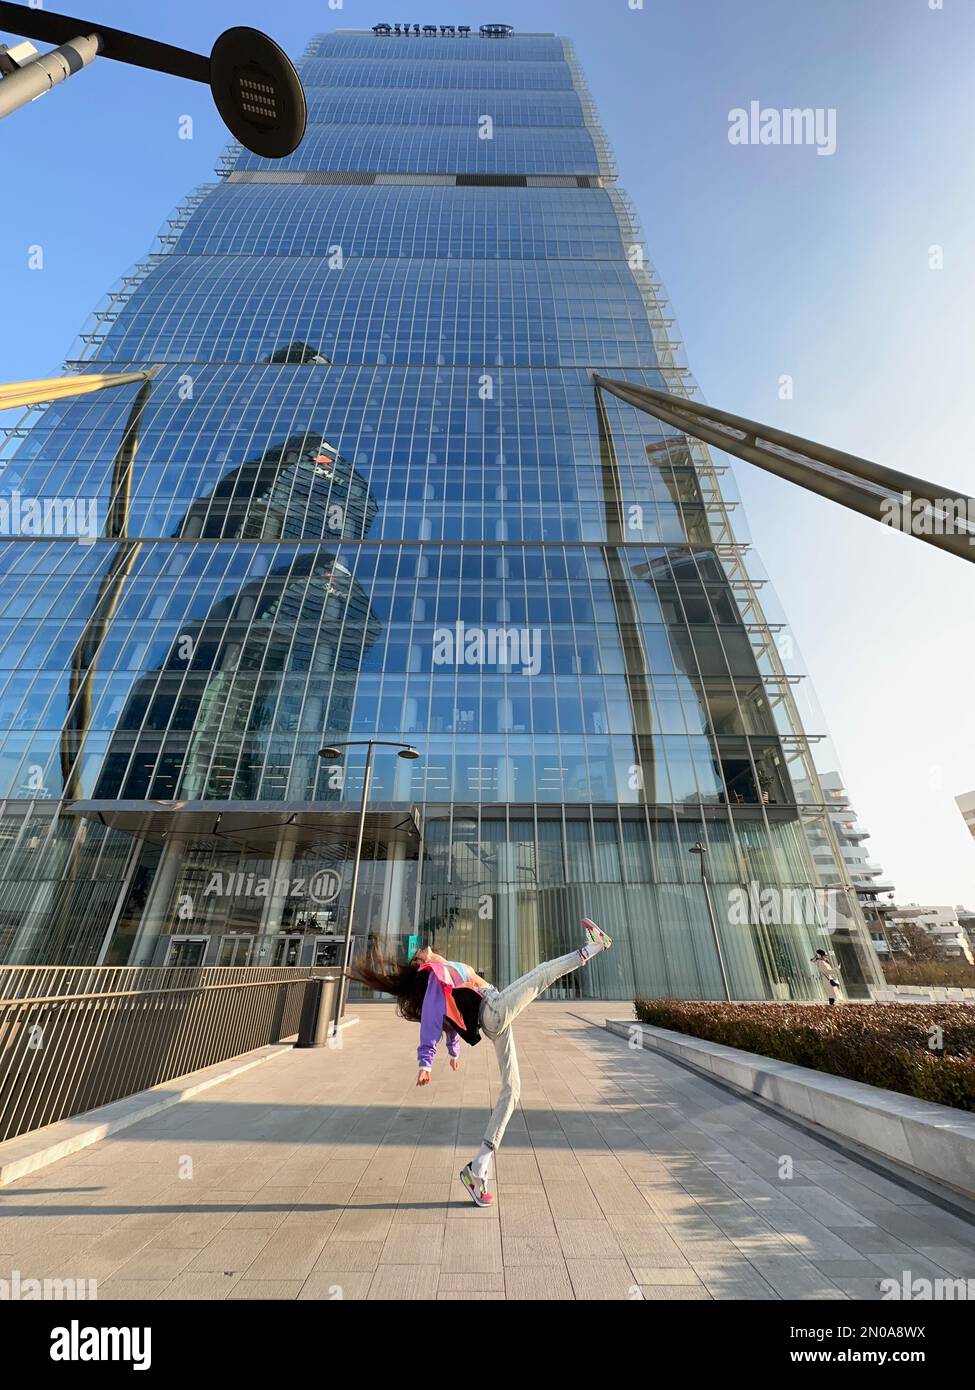 a fantastic image of a young girl, dancing in bright fashionable clothes, under the CityLife Allianz tower, Isozaki tower, CityLife, Milan, Italy Stock Photo